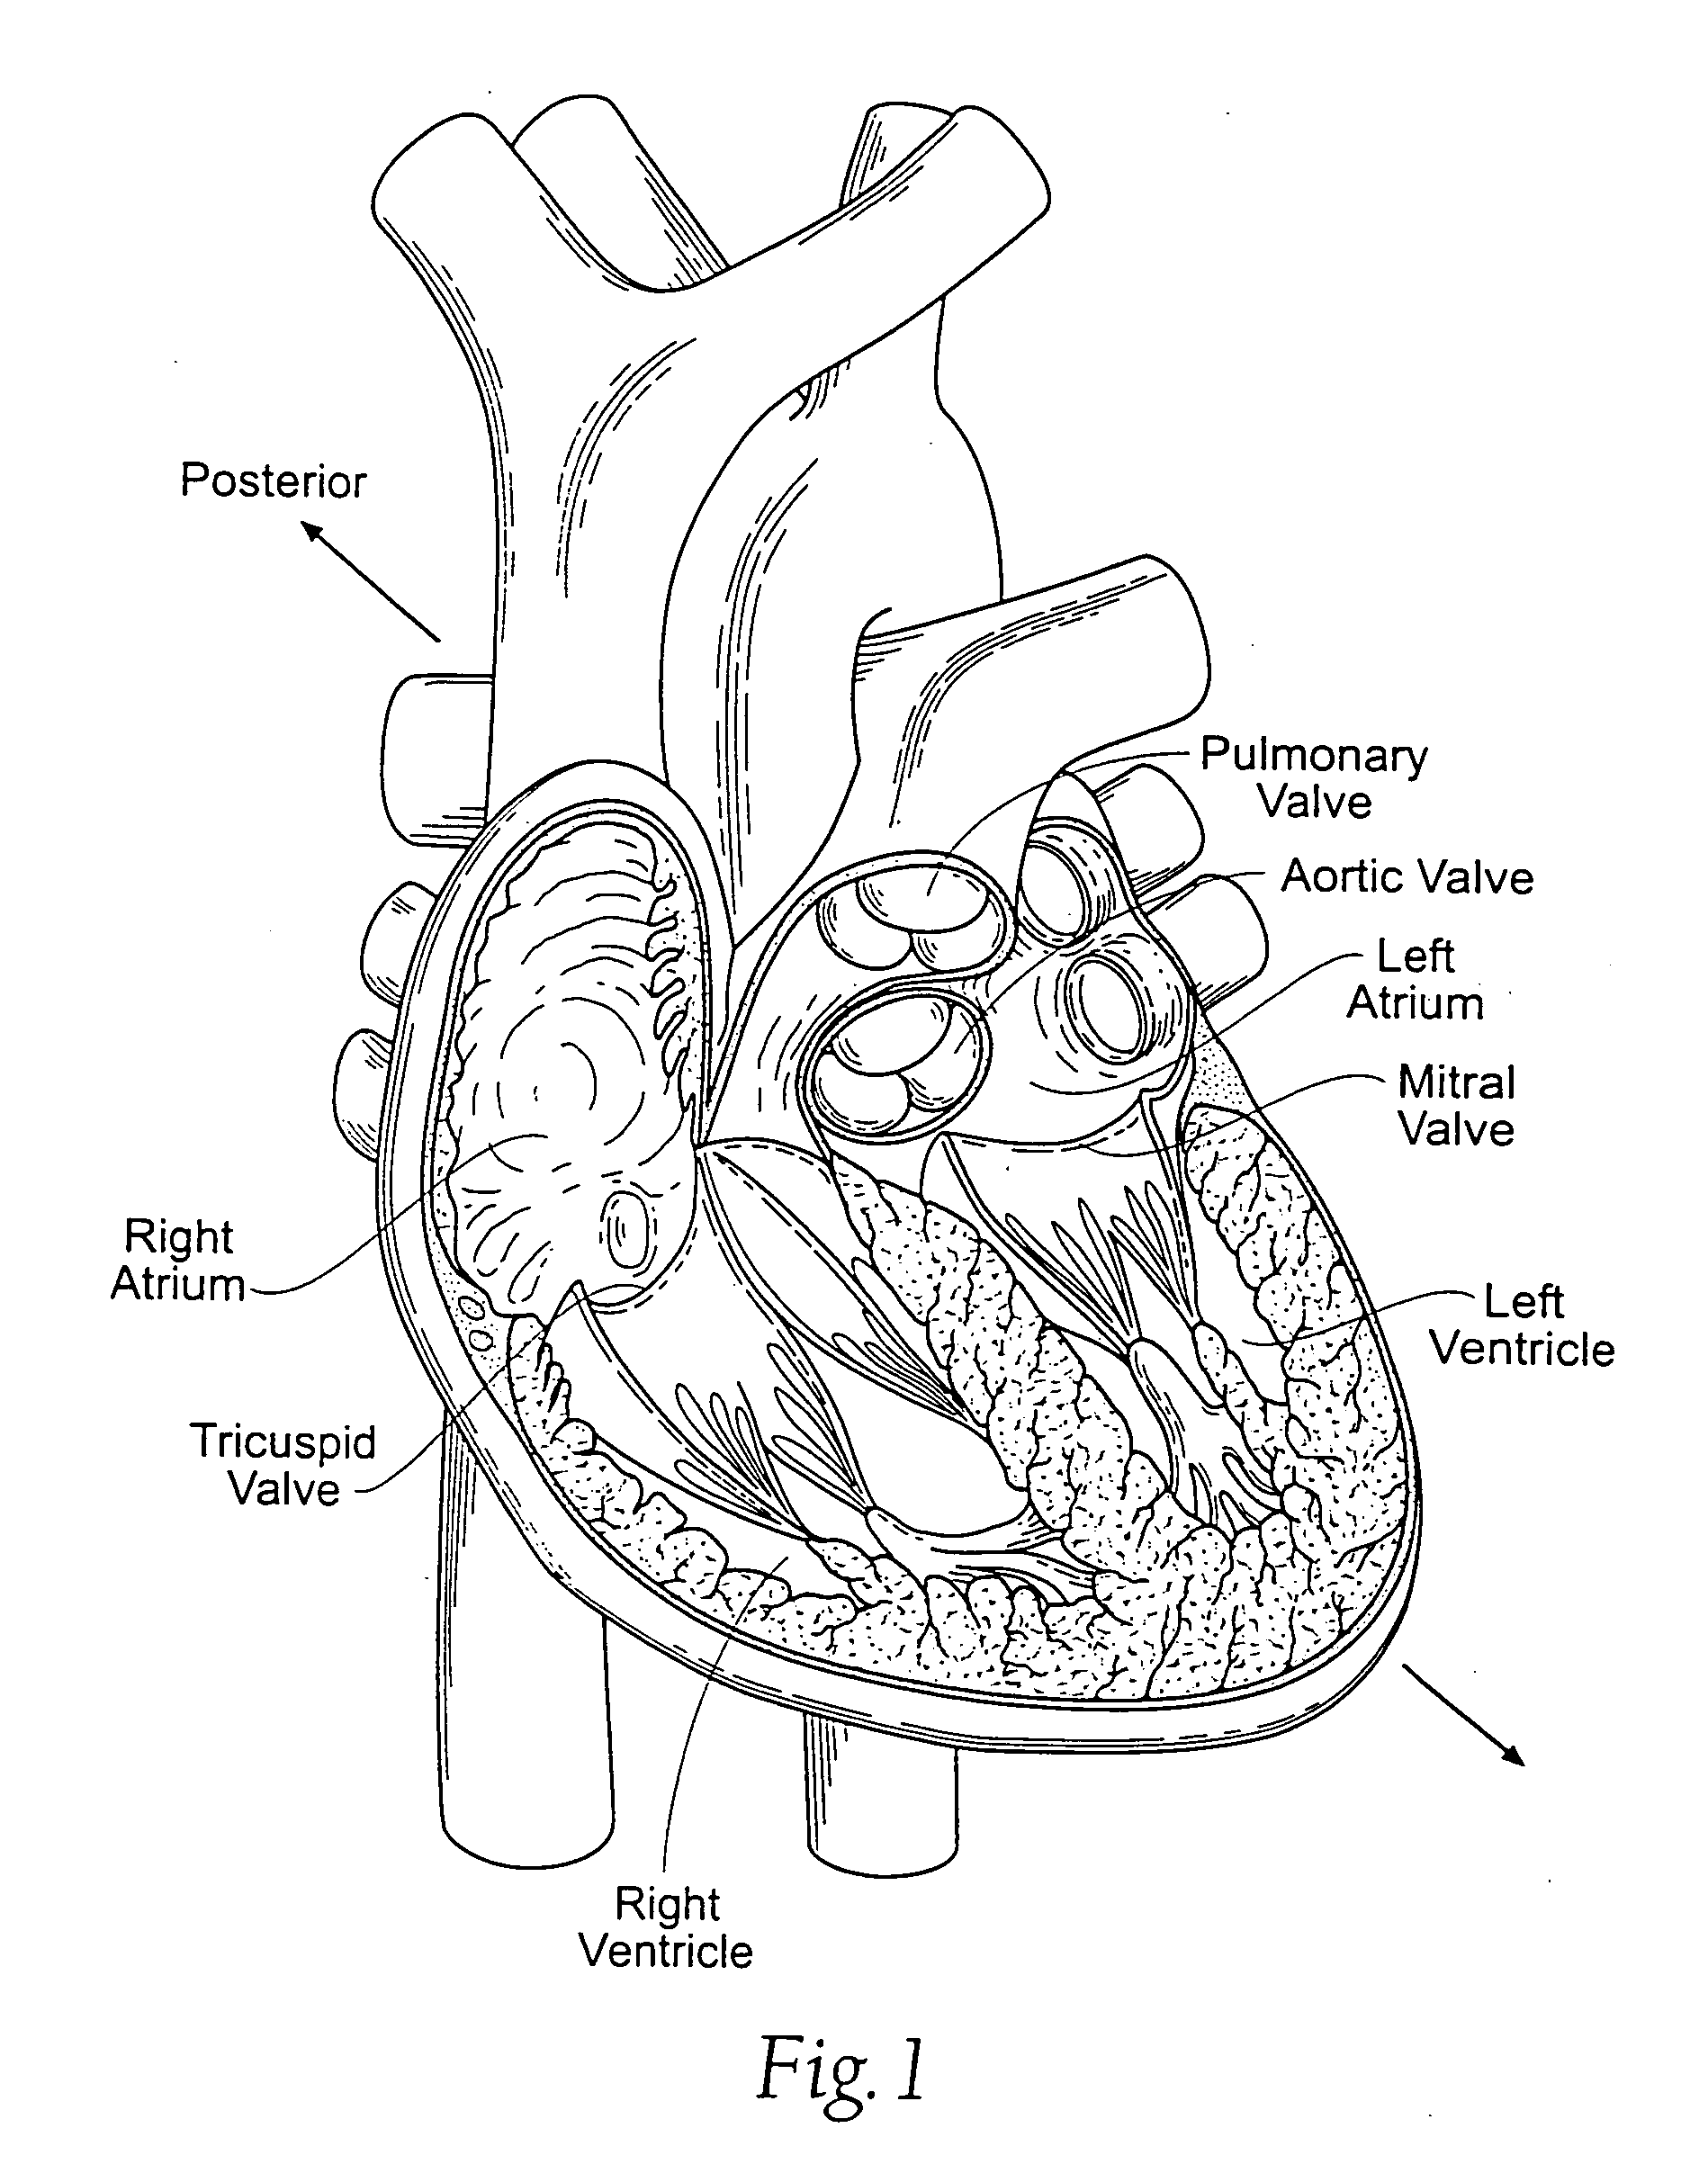 Devices, systems, and methods for supporting tissue and/or structures within a hollow body organ